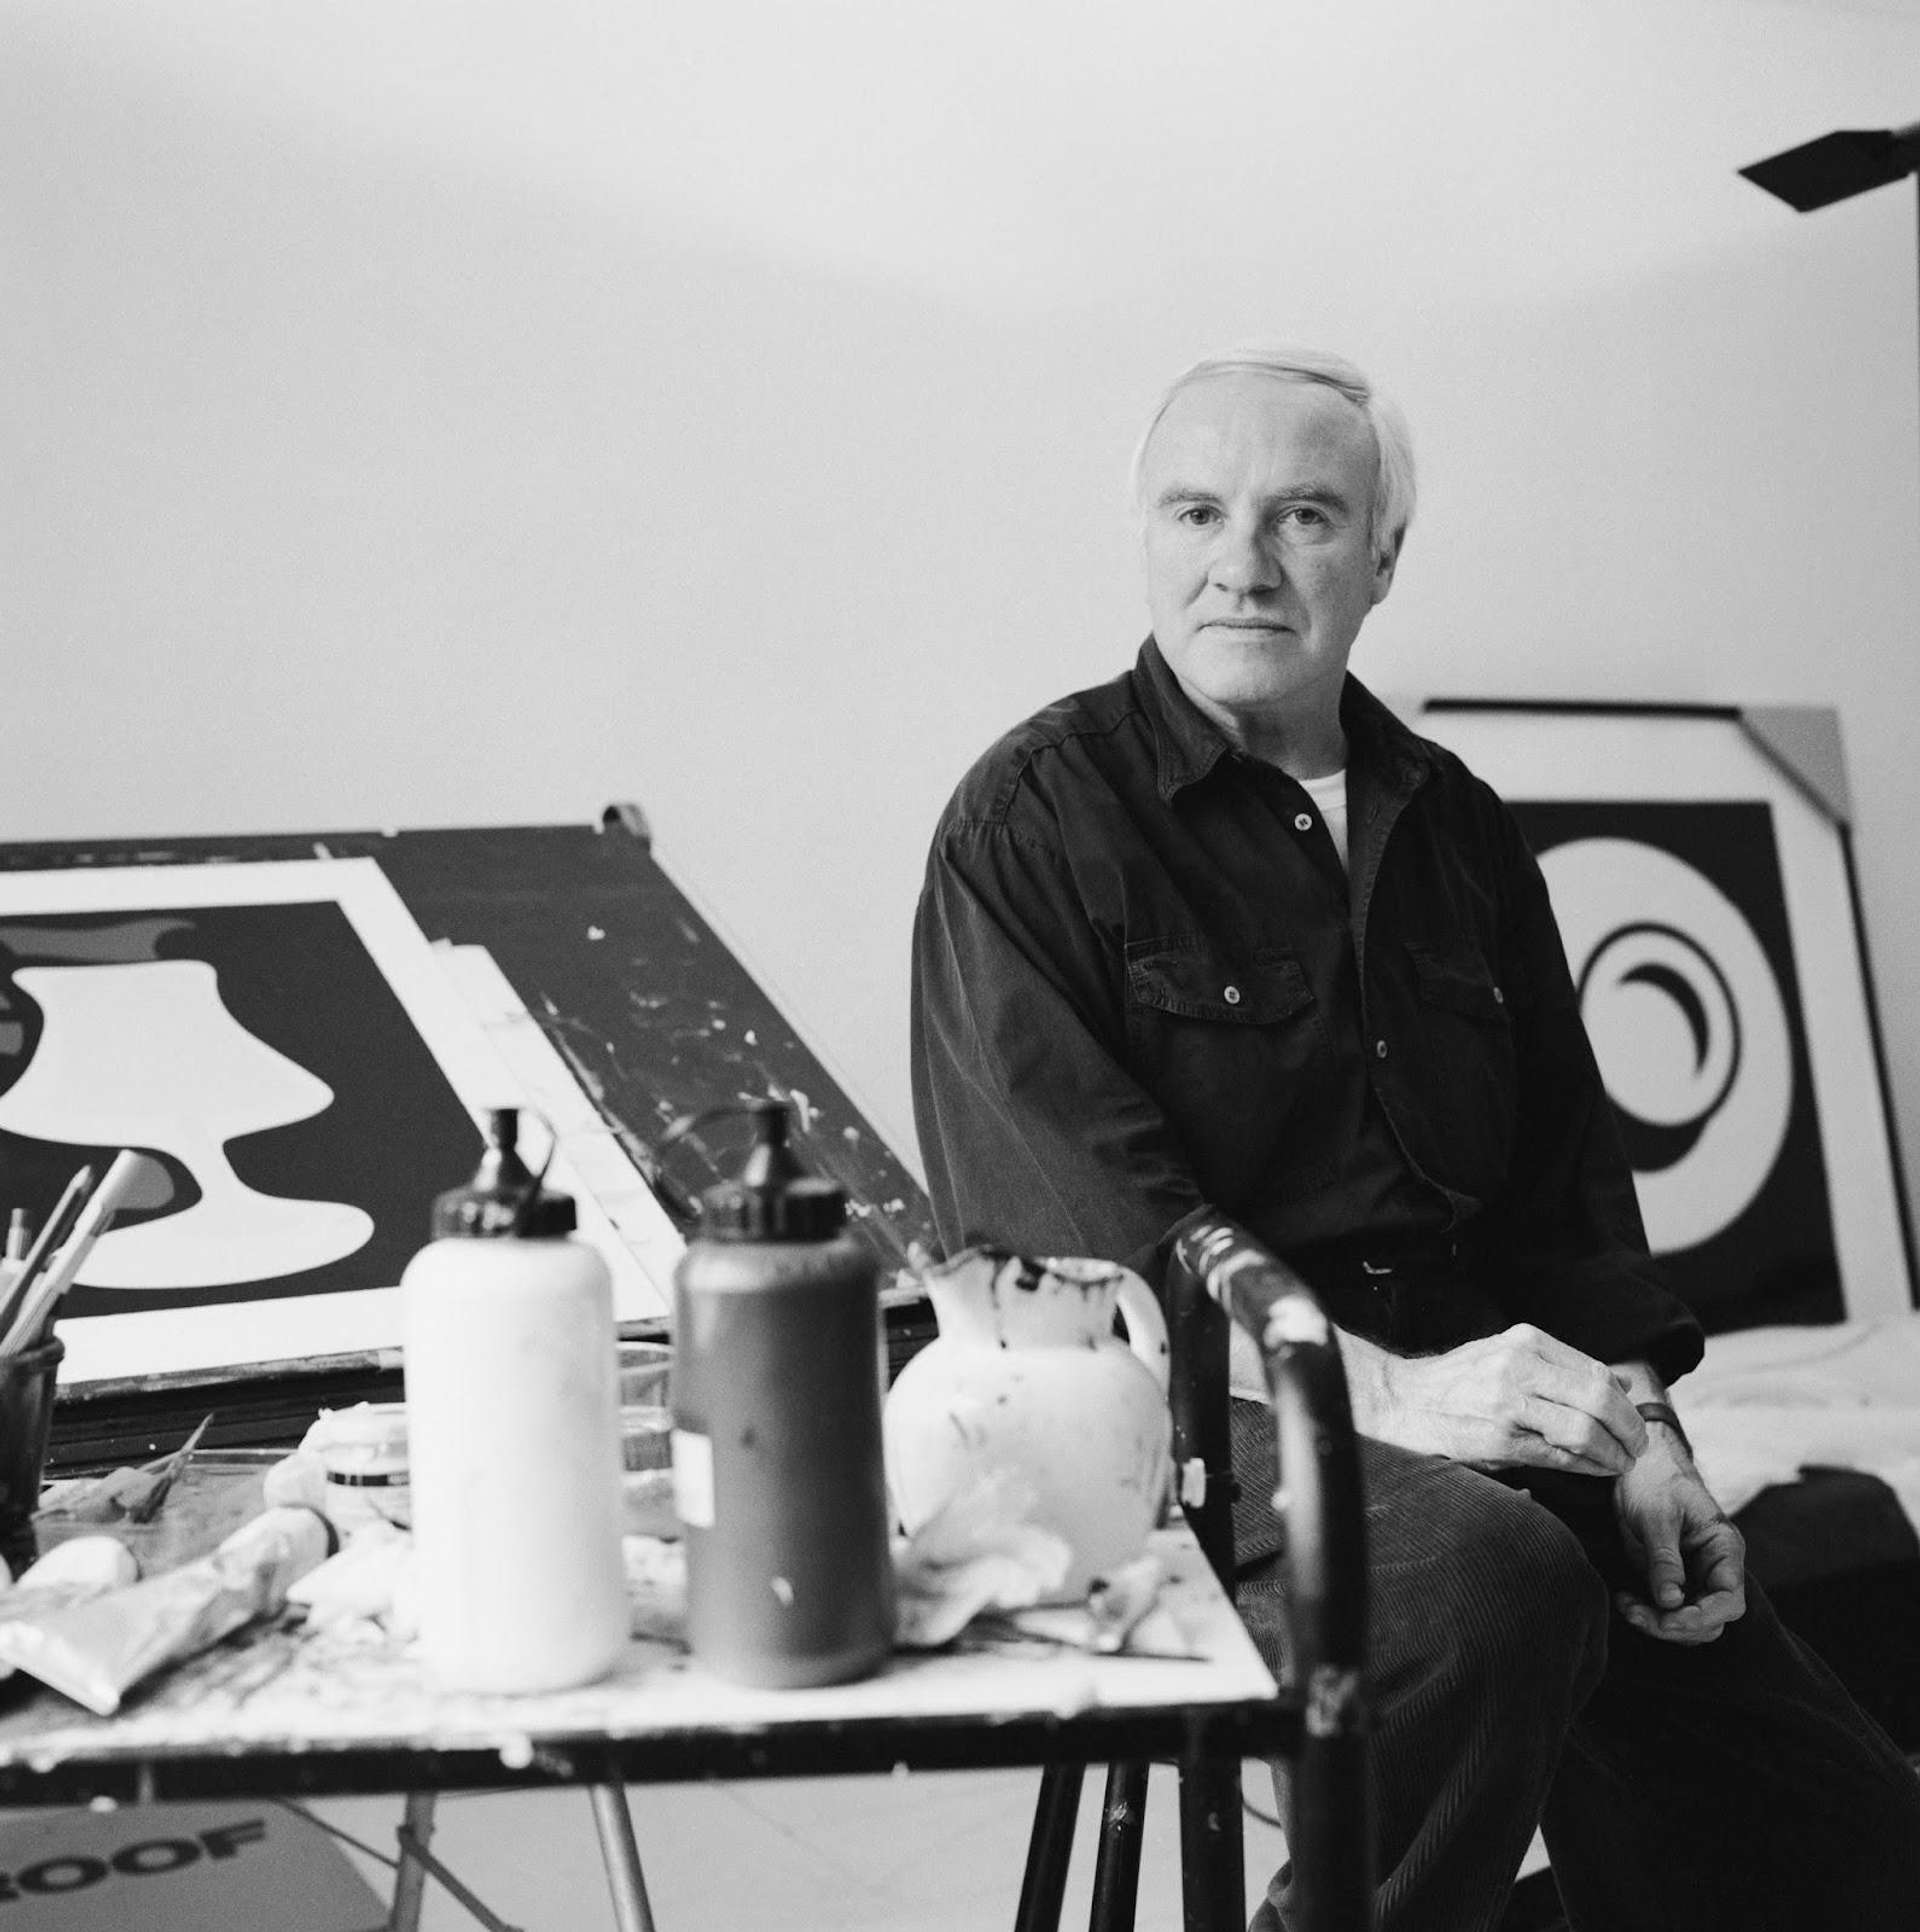 A black and white photographic image of artist Patrick Caulfield, standing in front of several of his works in his studio.